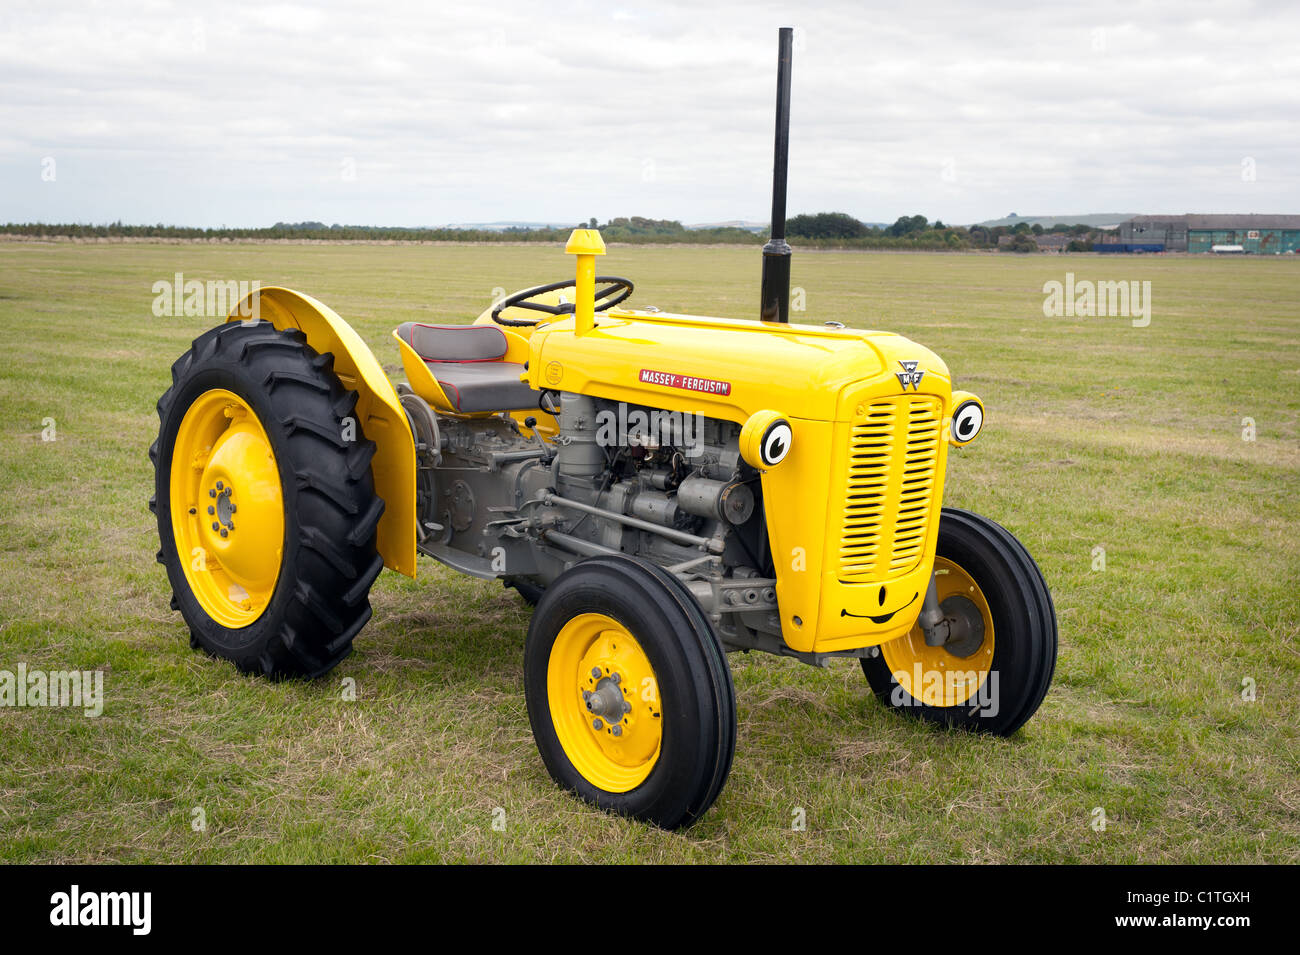 Massey Ferguson Tractor High Resolution Stock Photography And Images Alamy